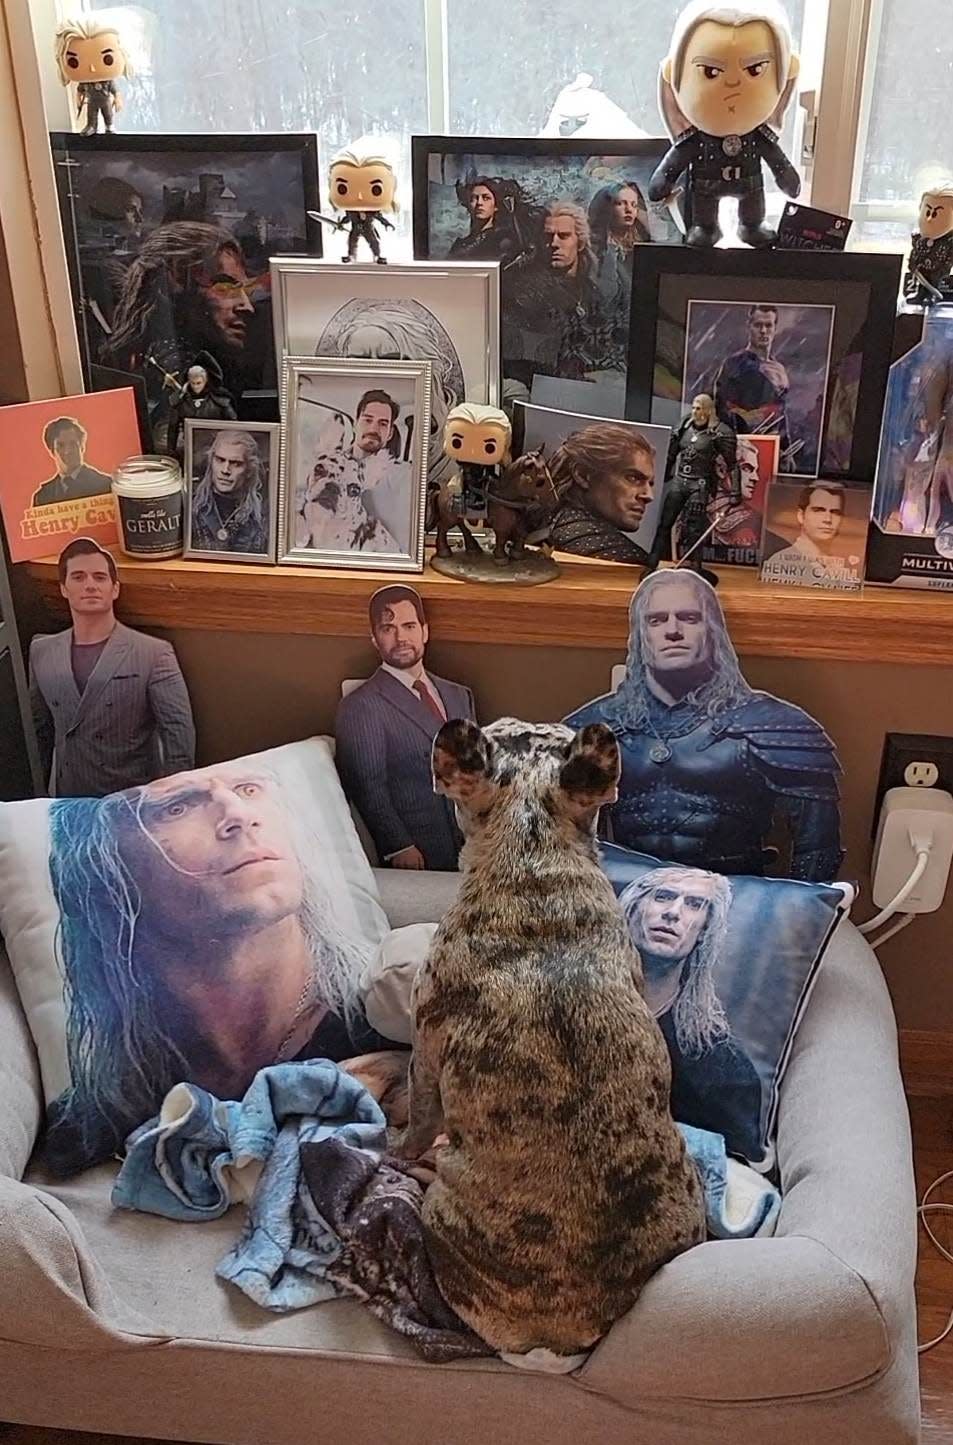 Rory the merle French bulldog in her Henry Cavill shrine made up of memorabilia gifted to her by TikTok fans.